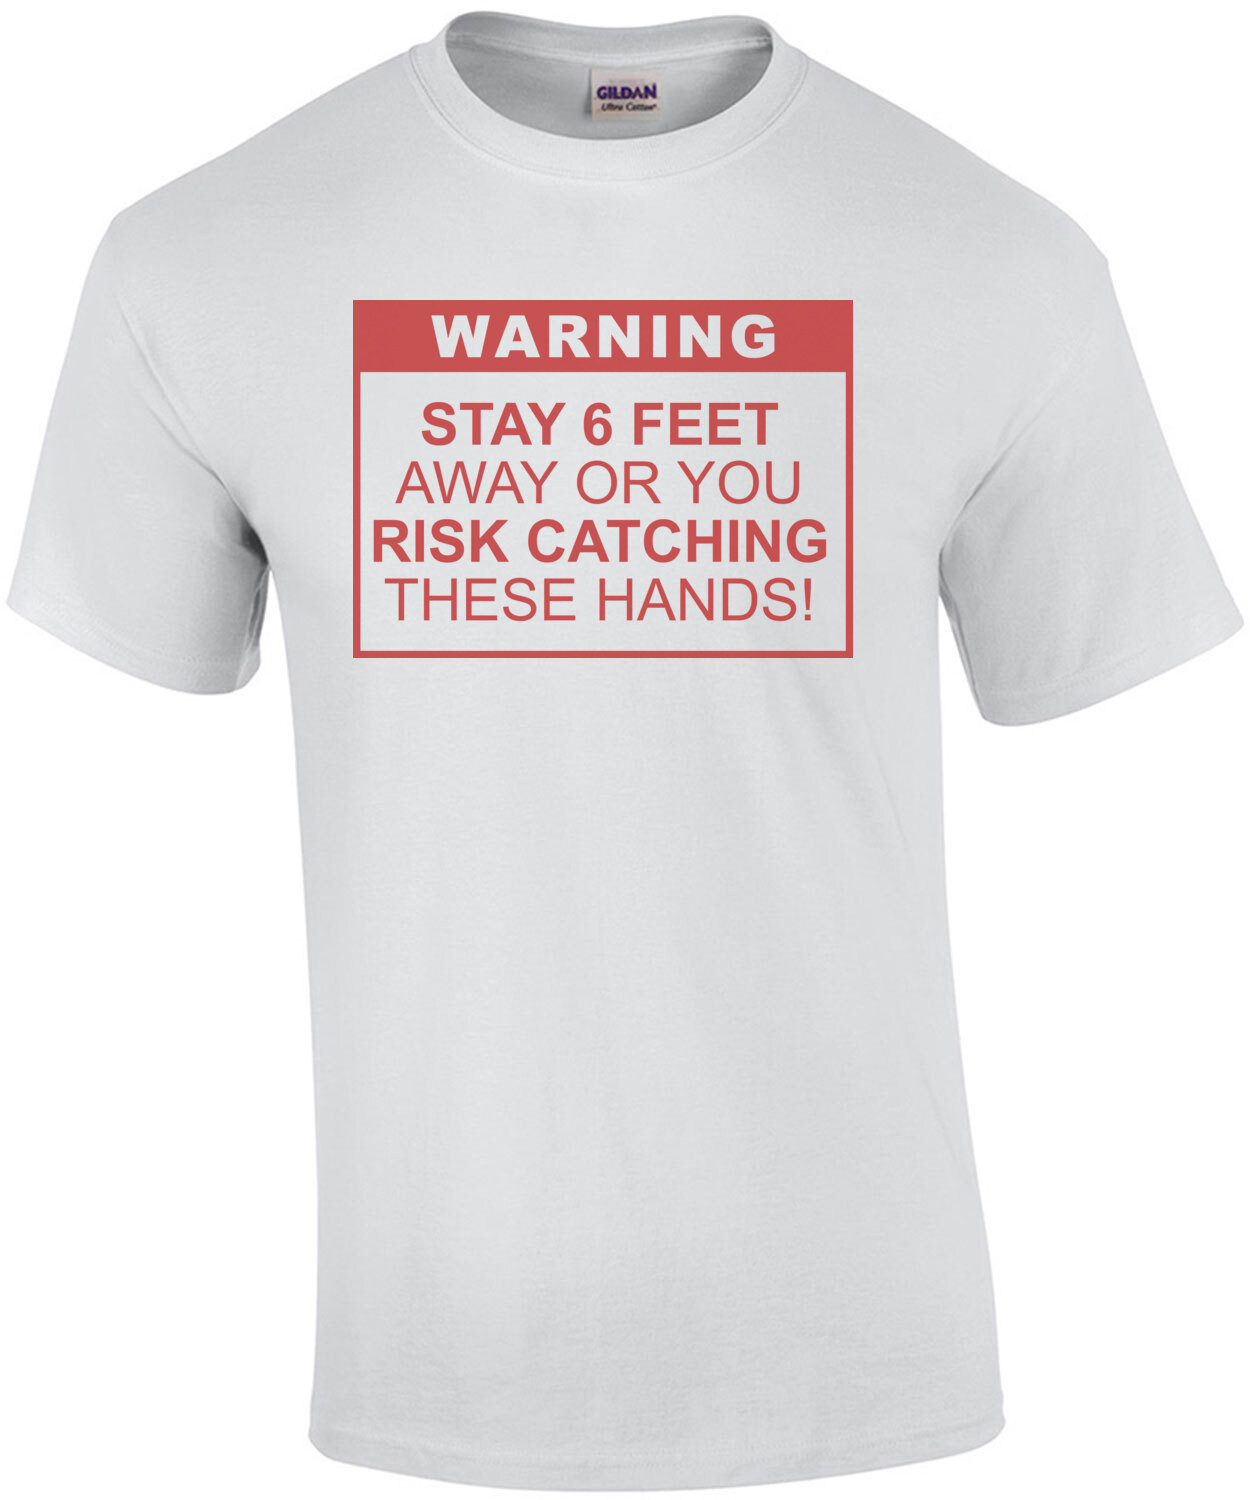 Warning: Stay 6 Feet Away or You Risk Catching These Hands Funny Covid Shirt